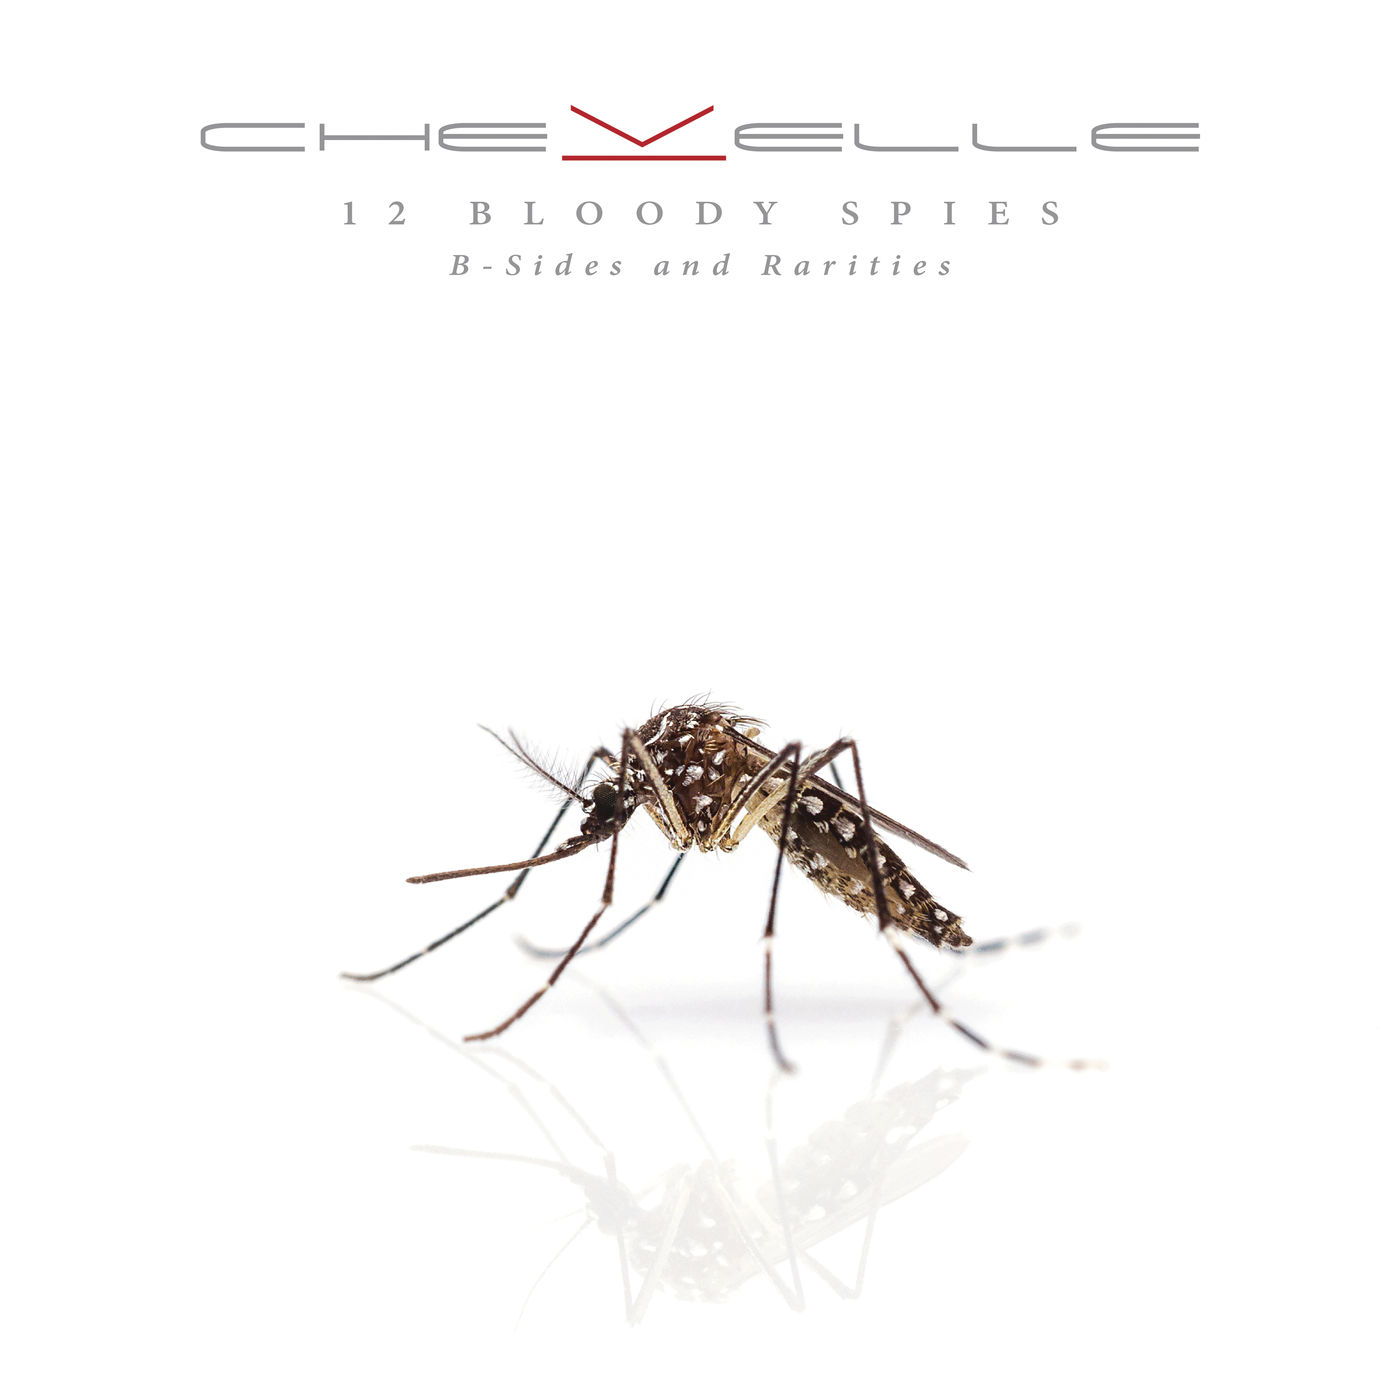 Chevelle - 12 Bloody Spies: B-sides and Rarities (2018)